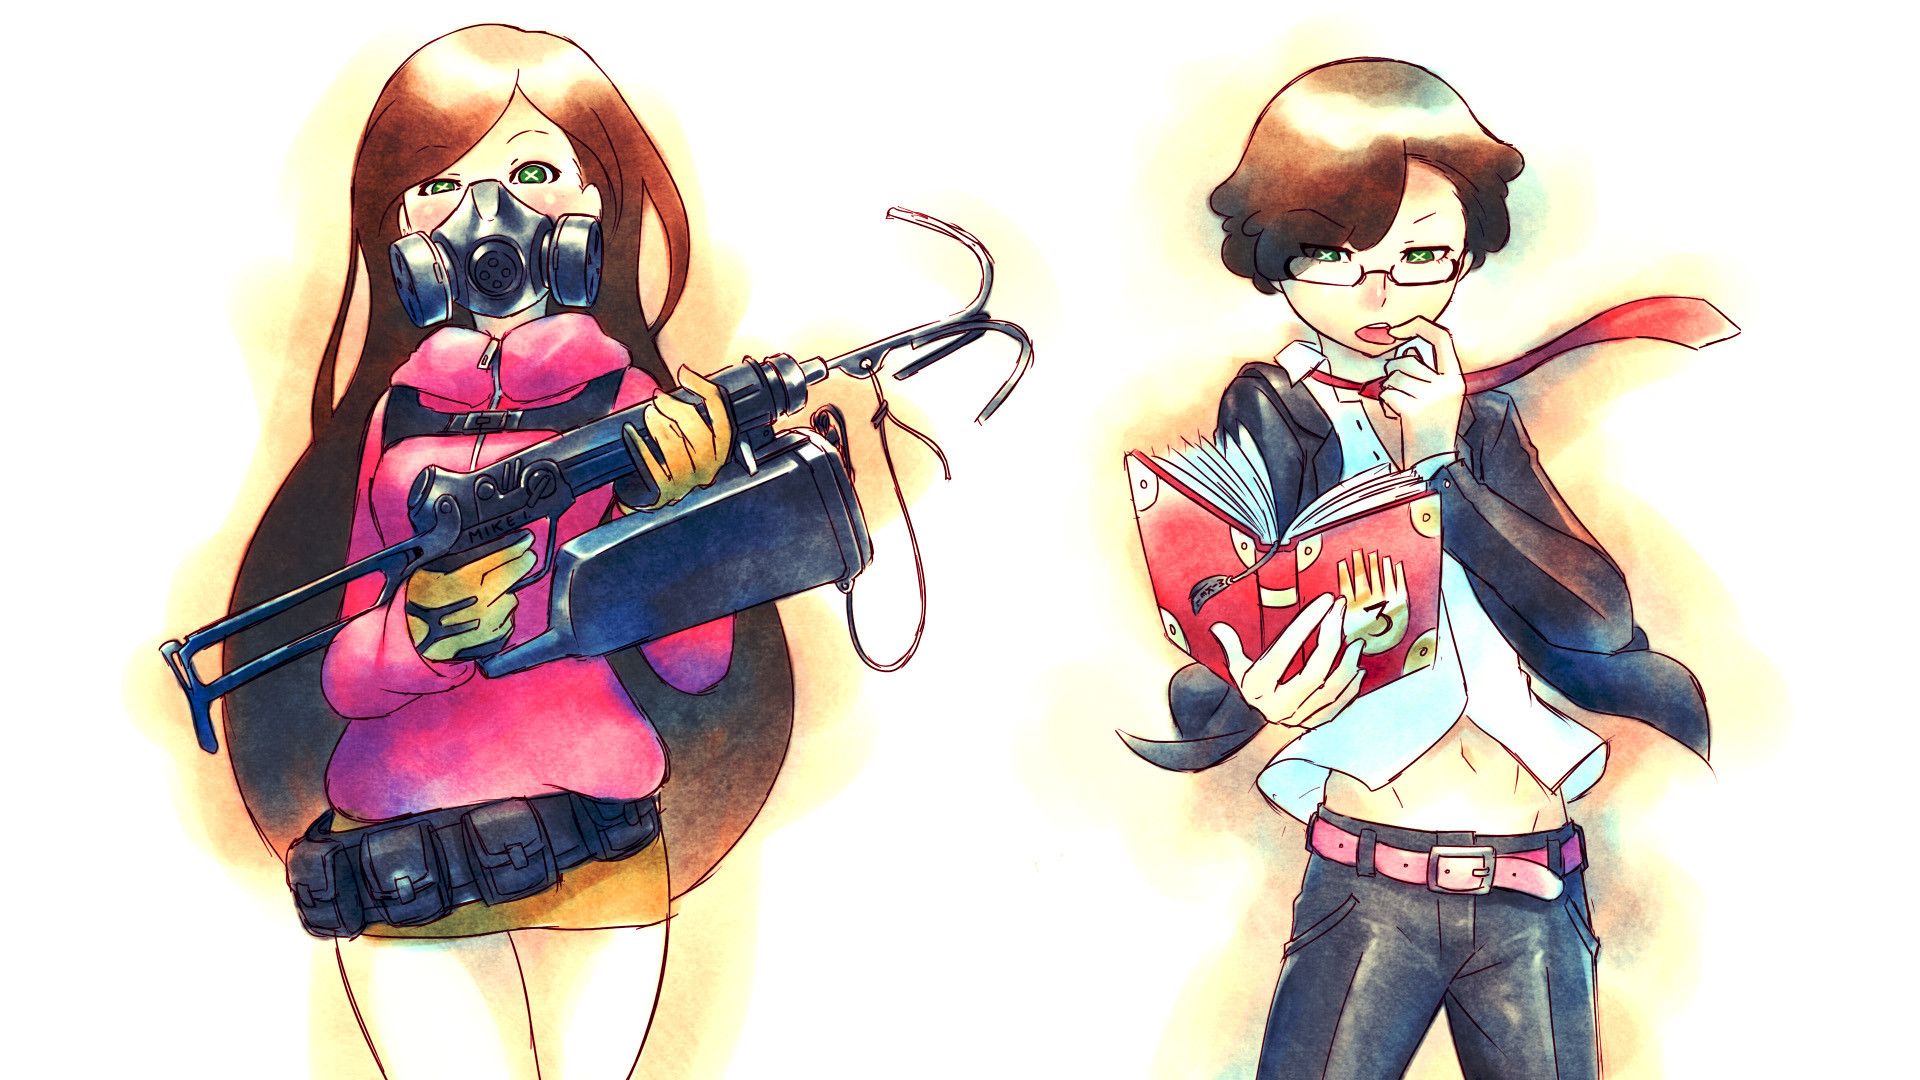 1920x1080 Tags: Anime, Mike Inel, Gravity Falls, Dipper Pines, Mabel Pines,